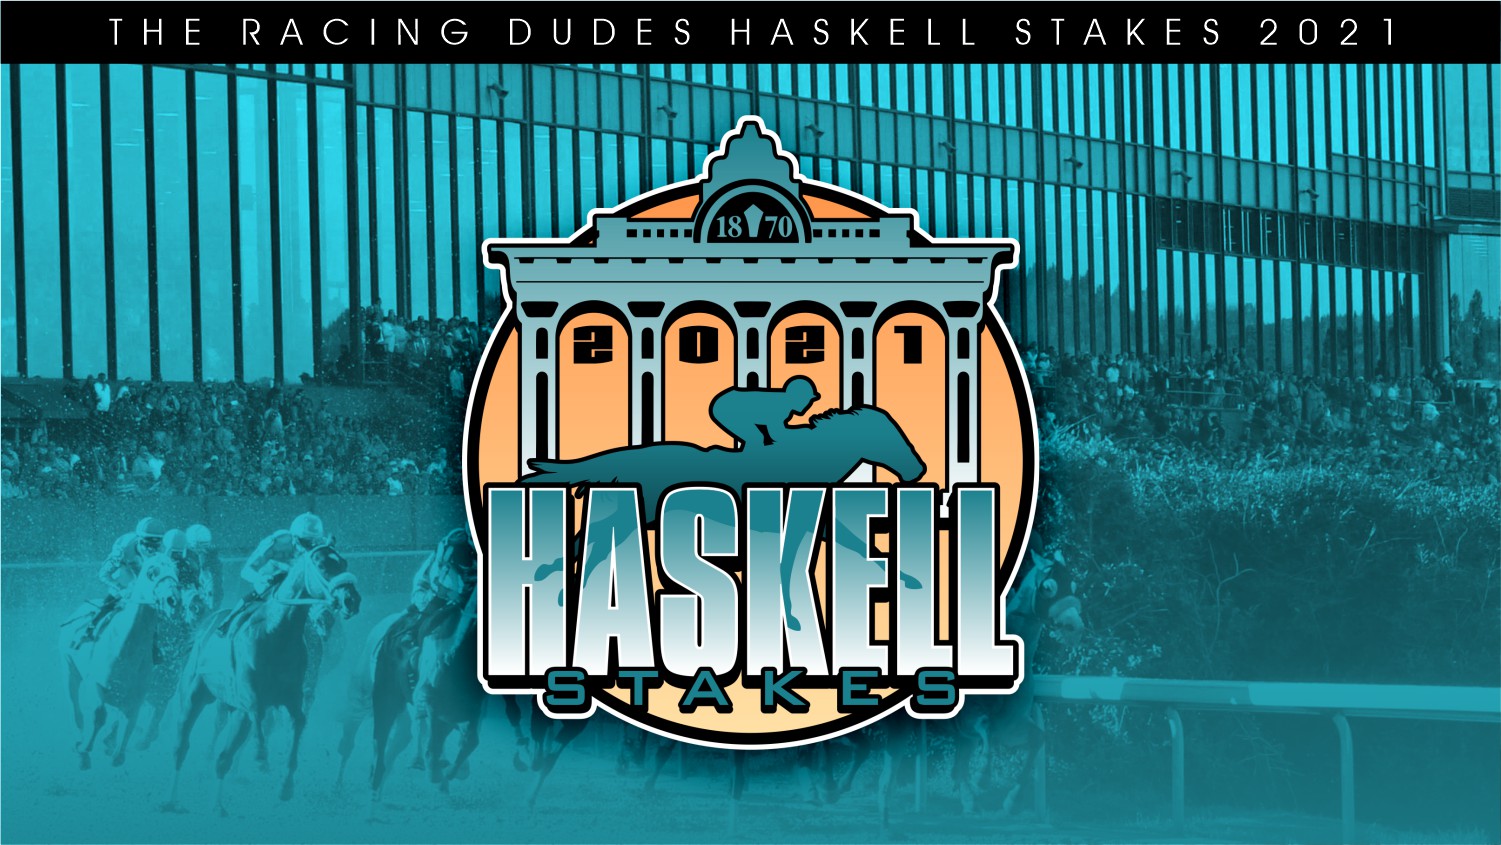 haskell stakes